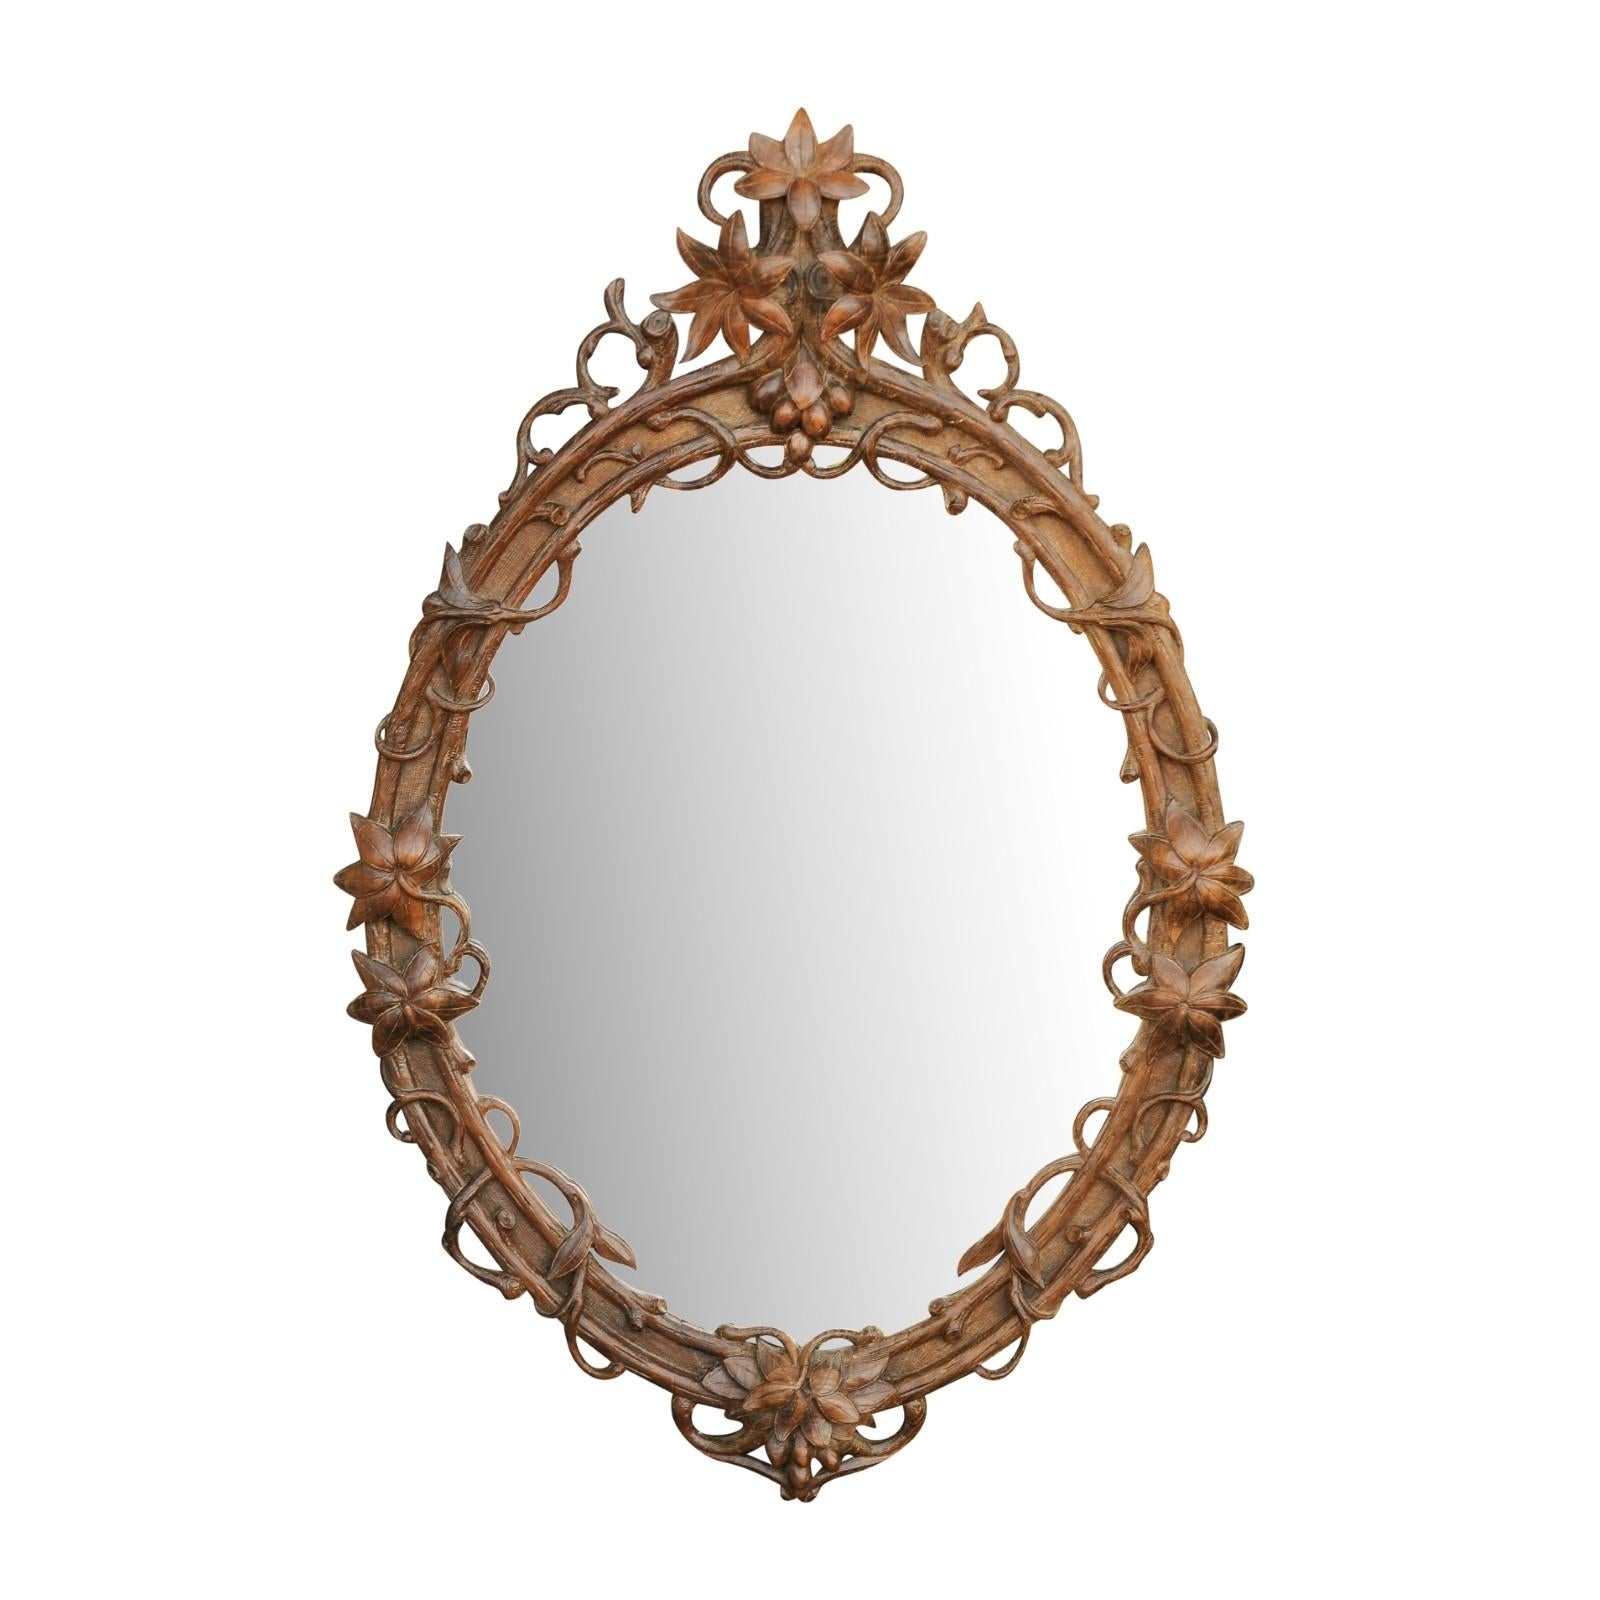 Black Forest Oval Oak Mirror with Hand Carved Edelweiss Flowers, circa 1900